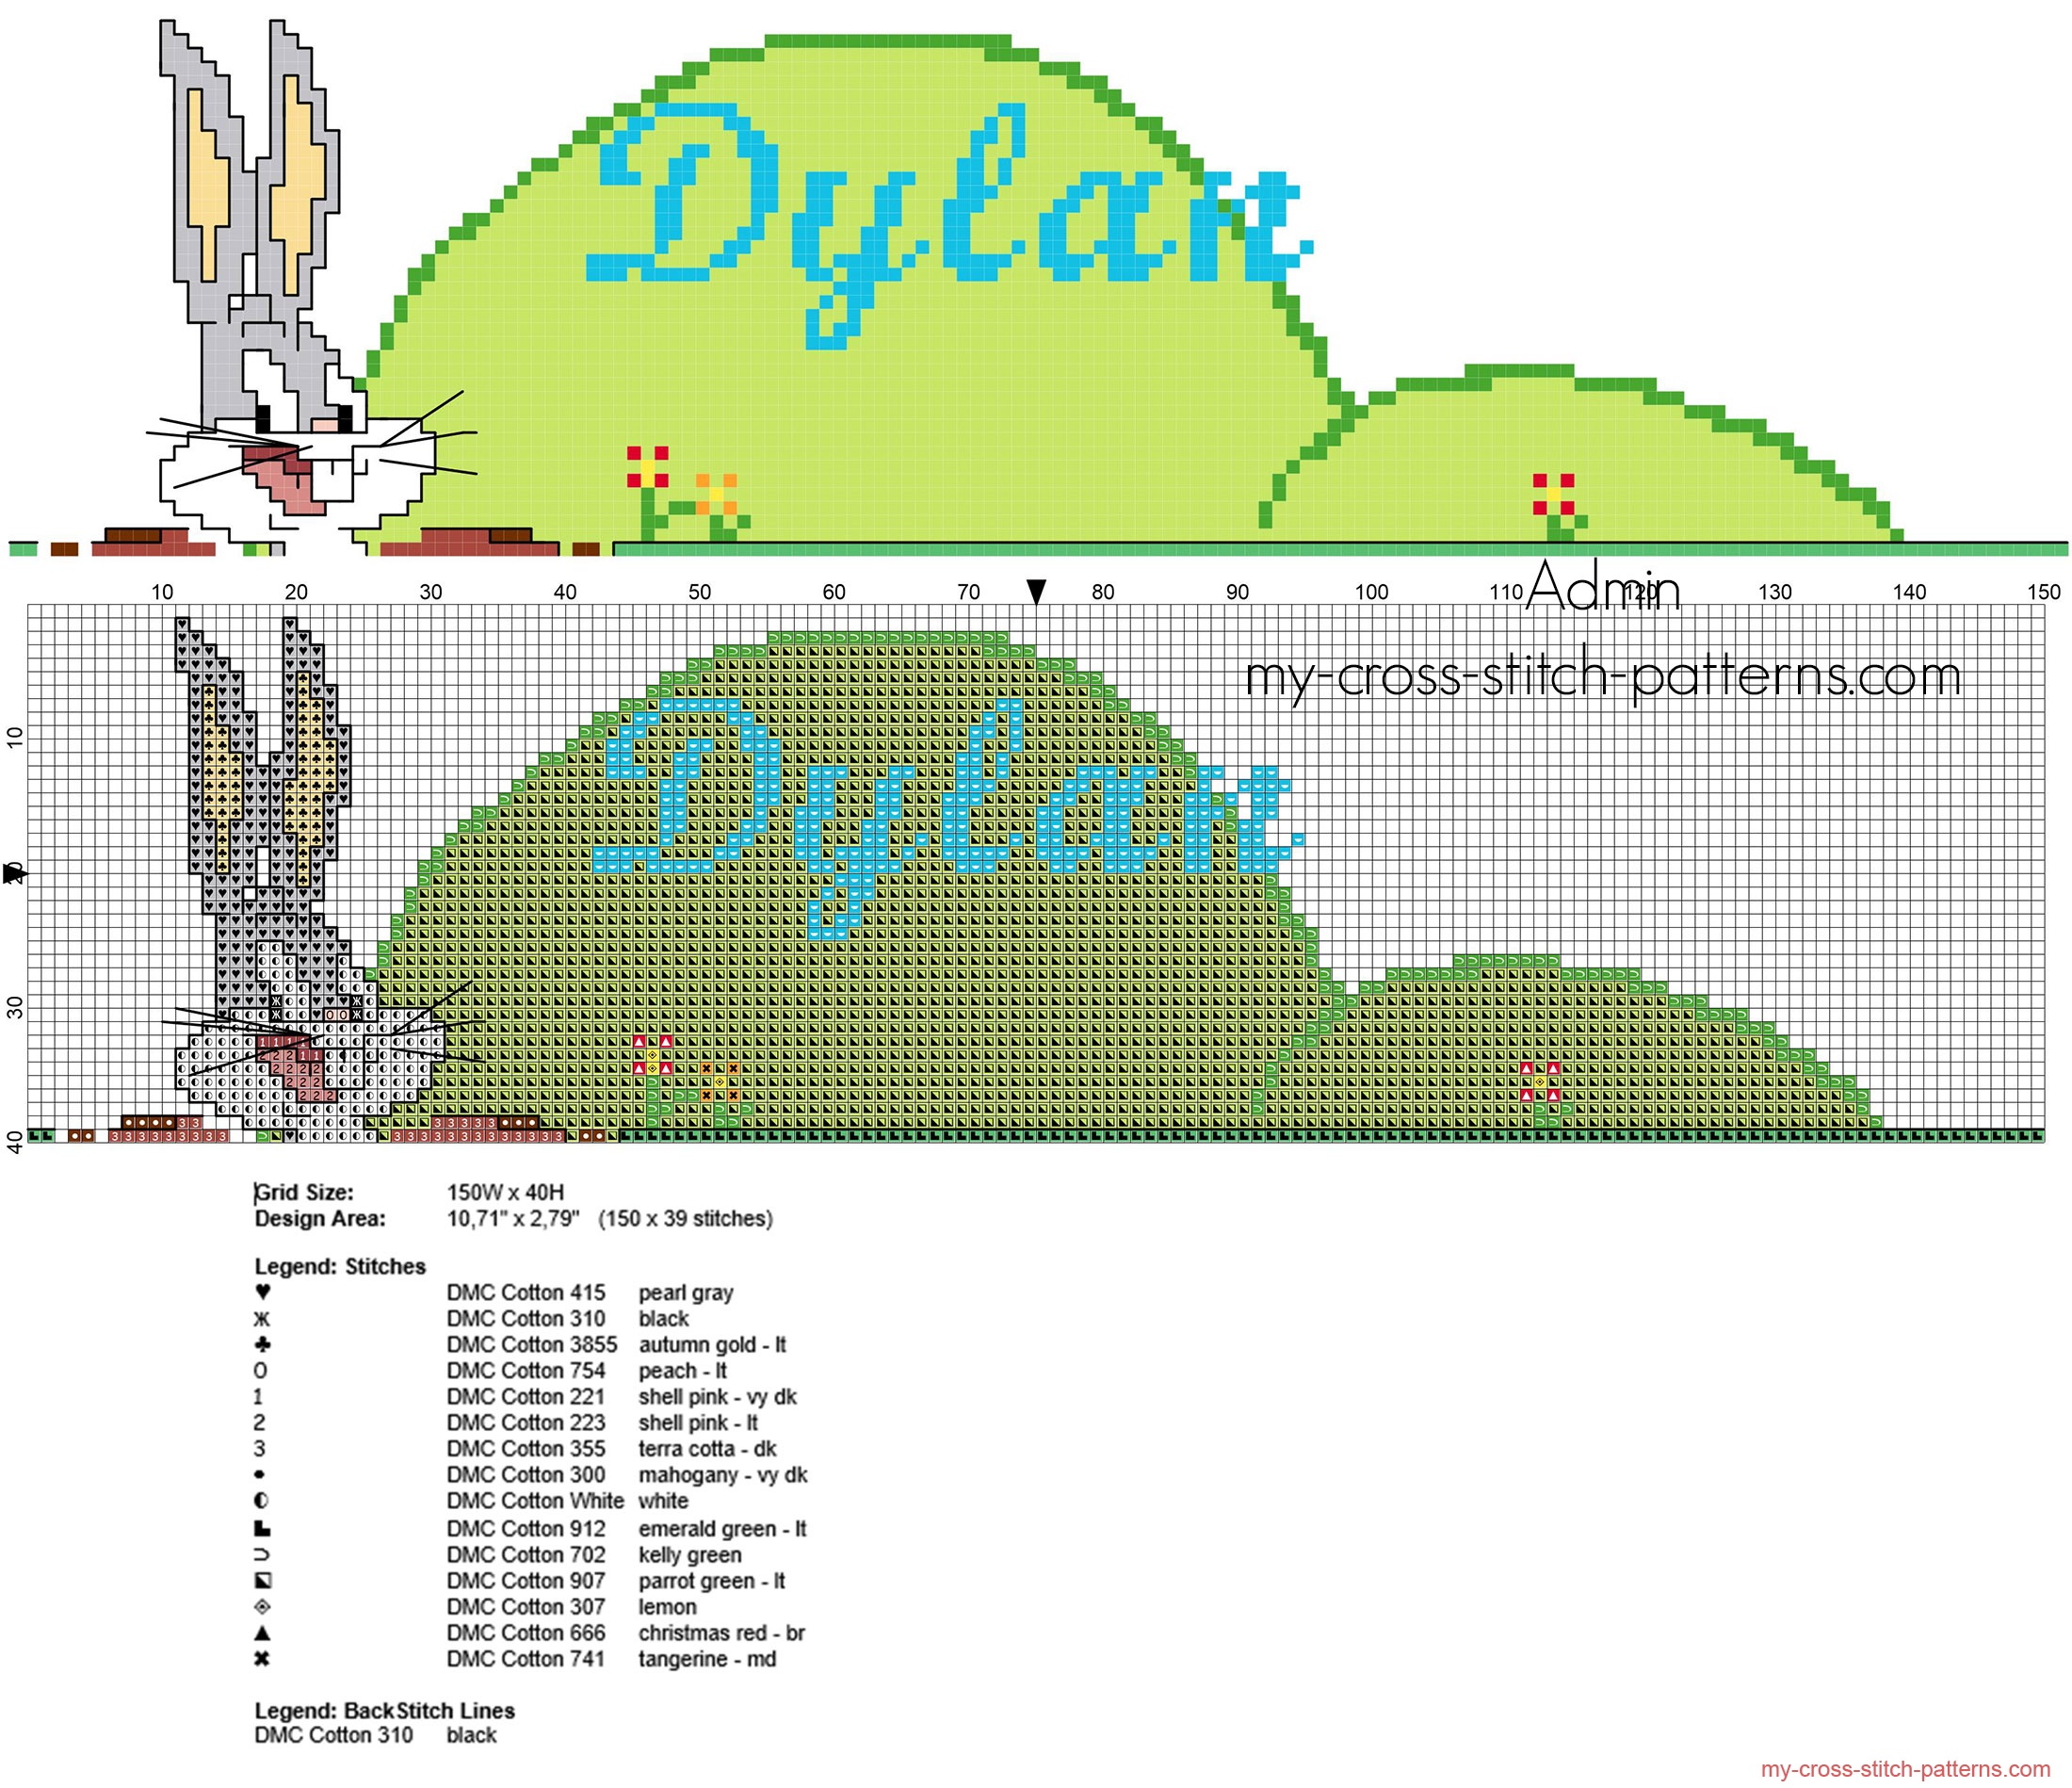 dylan_cross_stitch_pattern_baby_name_with_cartoons_characters_bugs_bunny